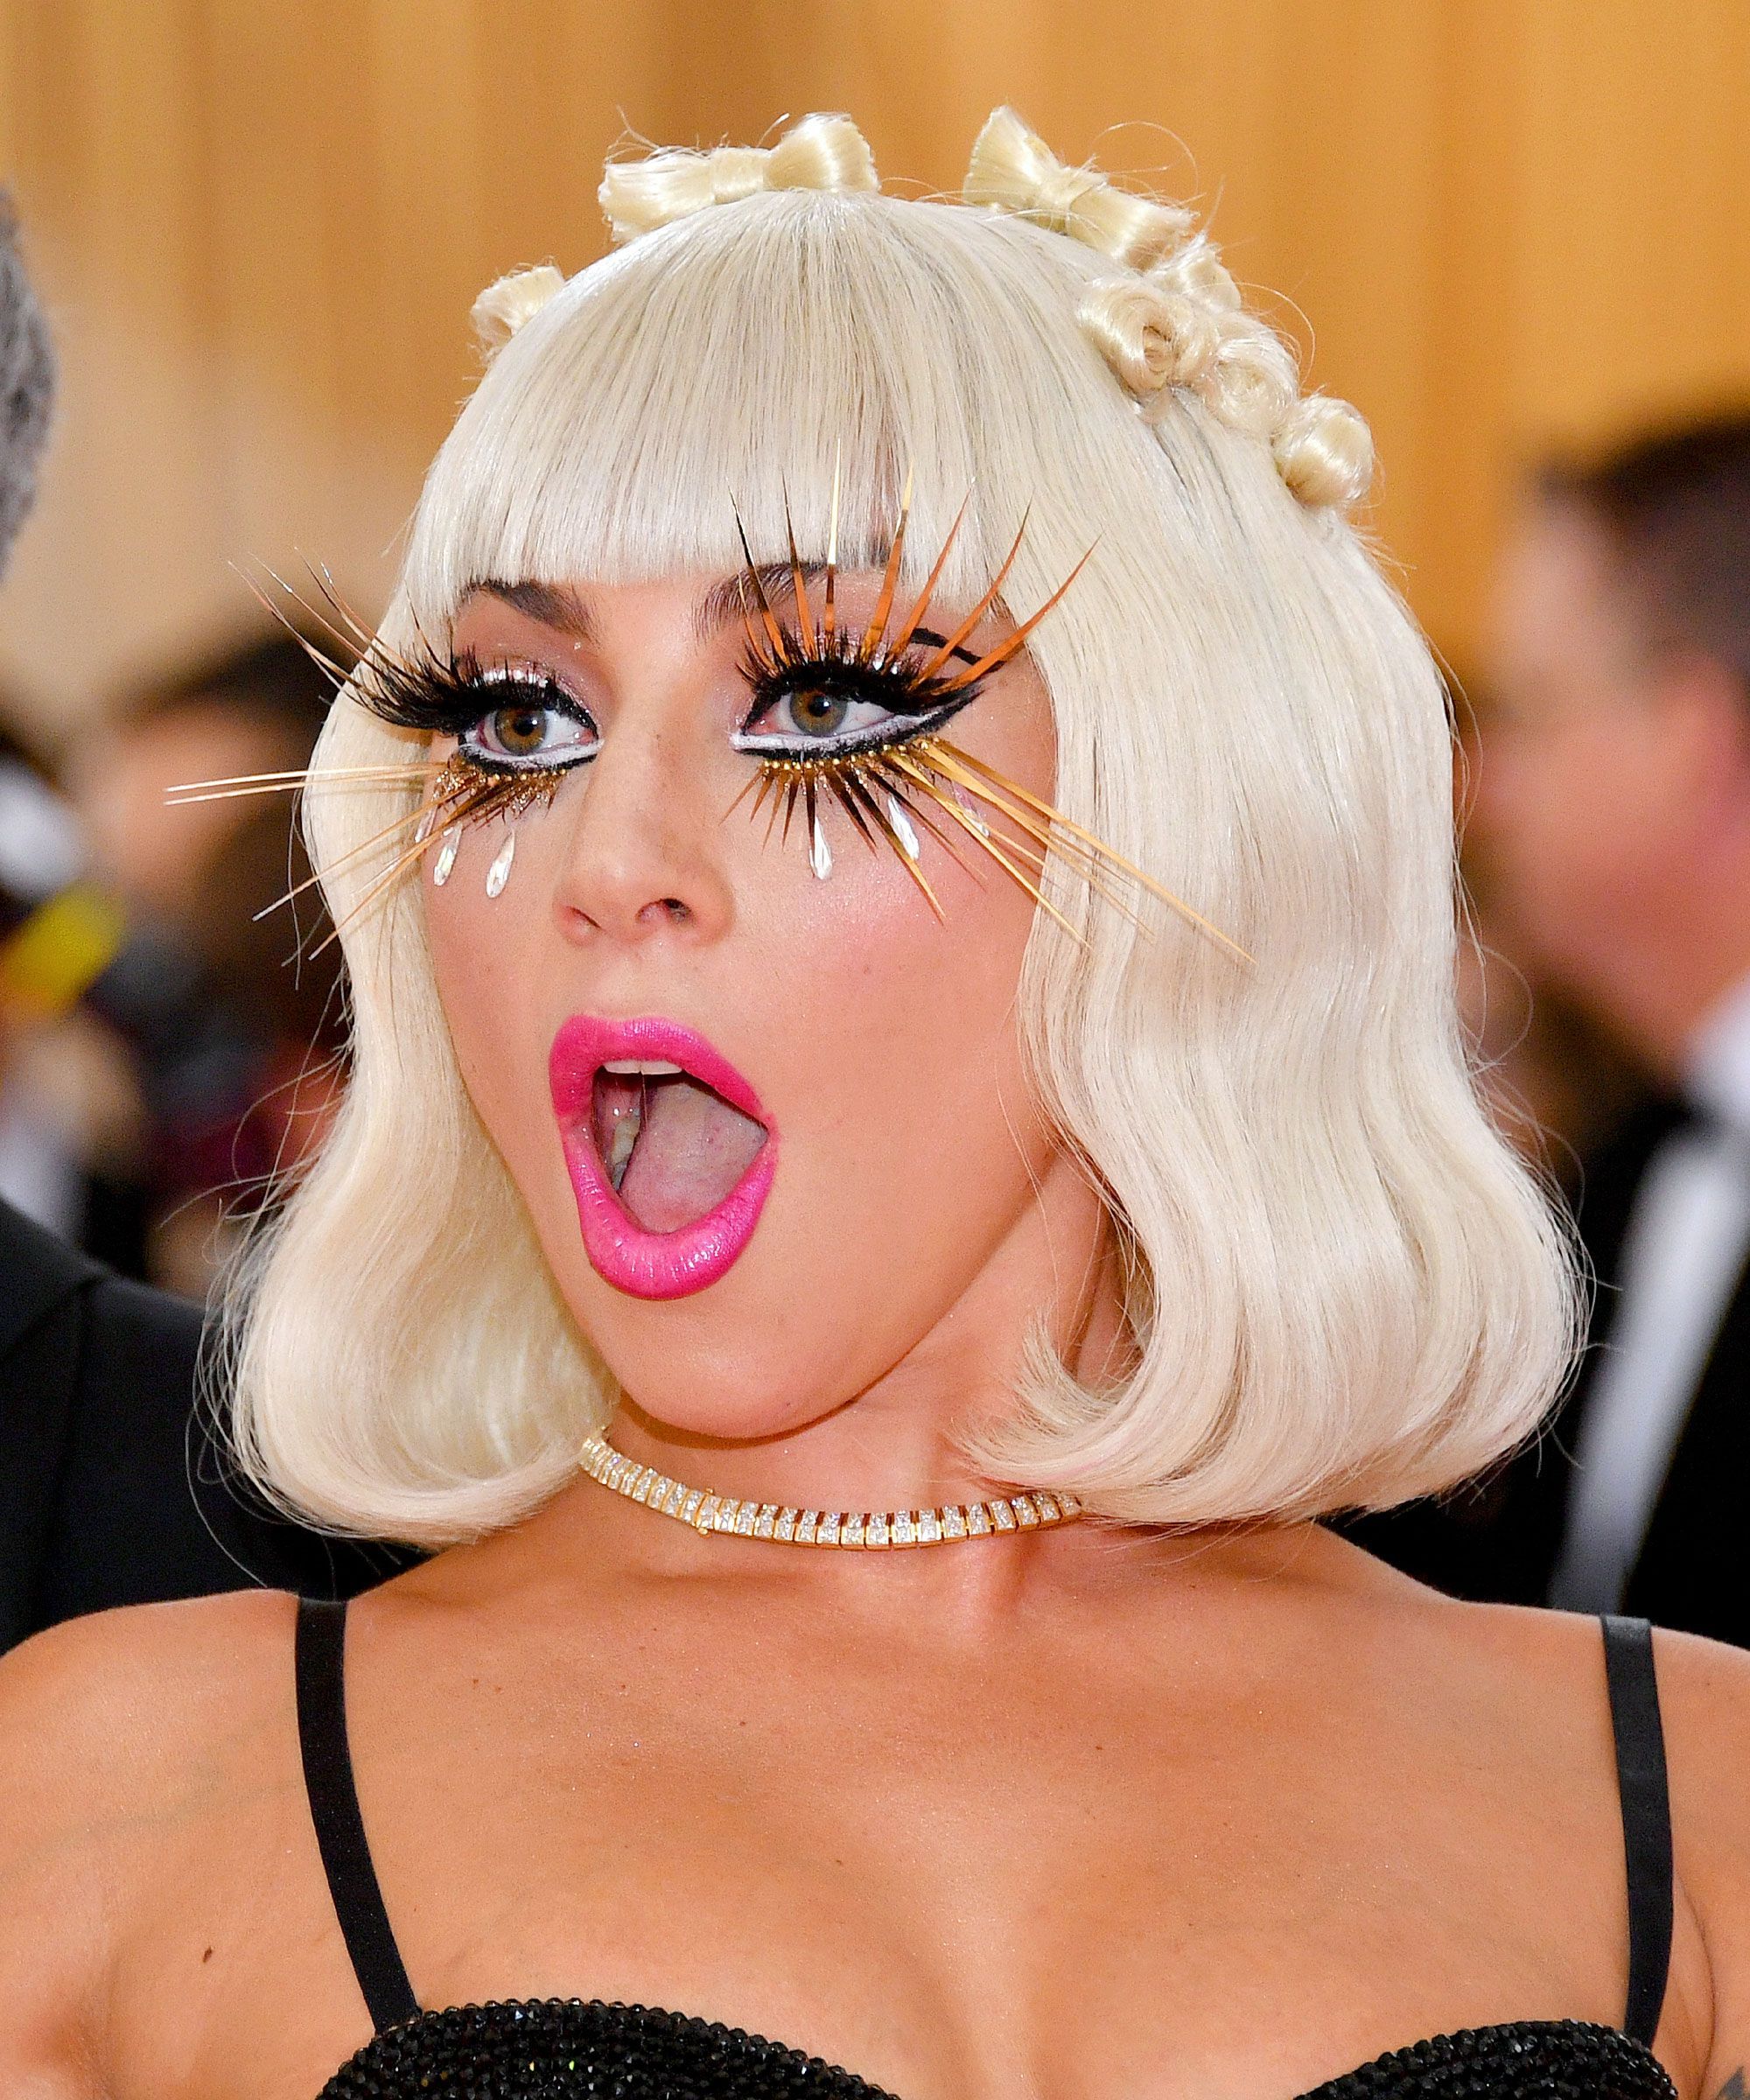 Lady-Gaga-Arrived-At-The-Met-Gala-With-The-Wildest.jpg